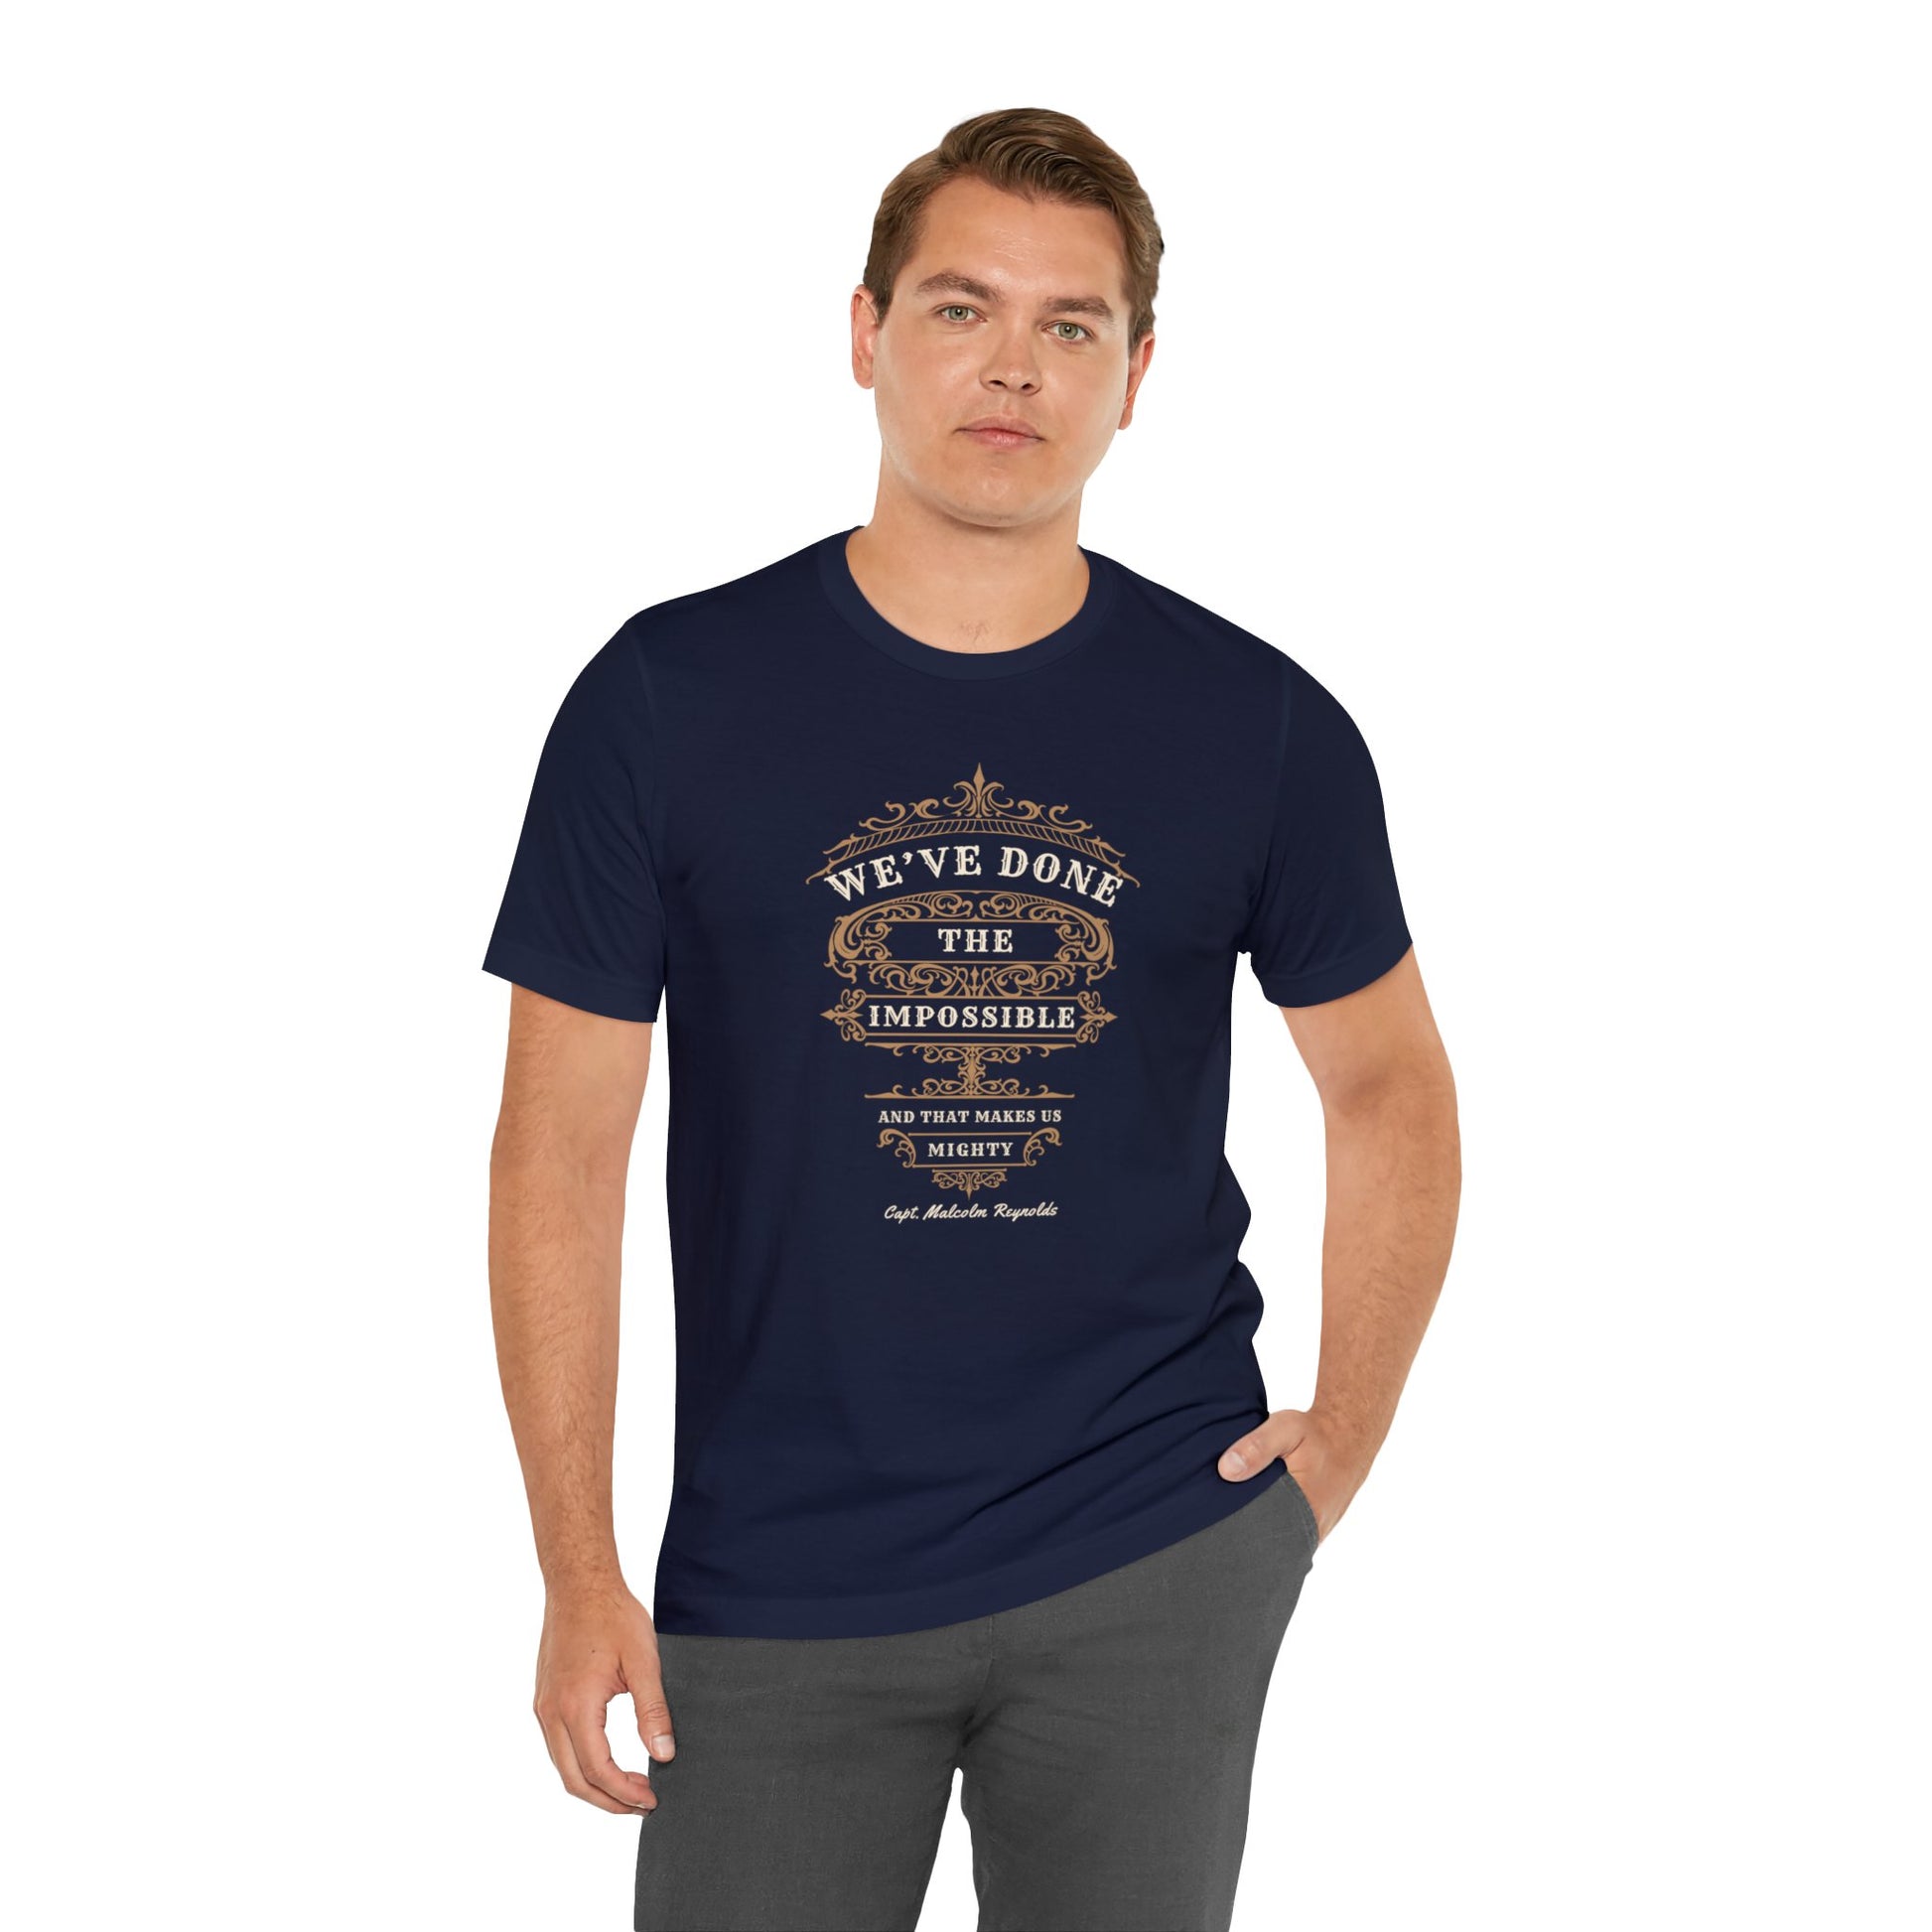 firefly quote tshirt